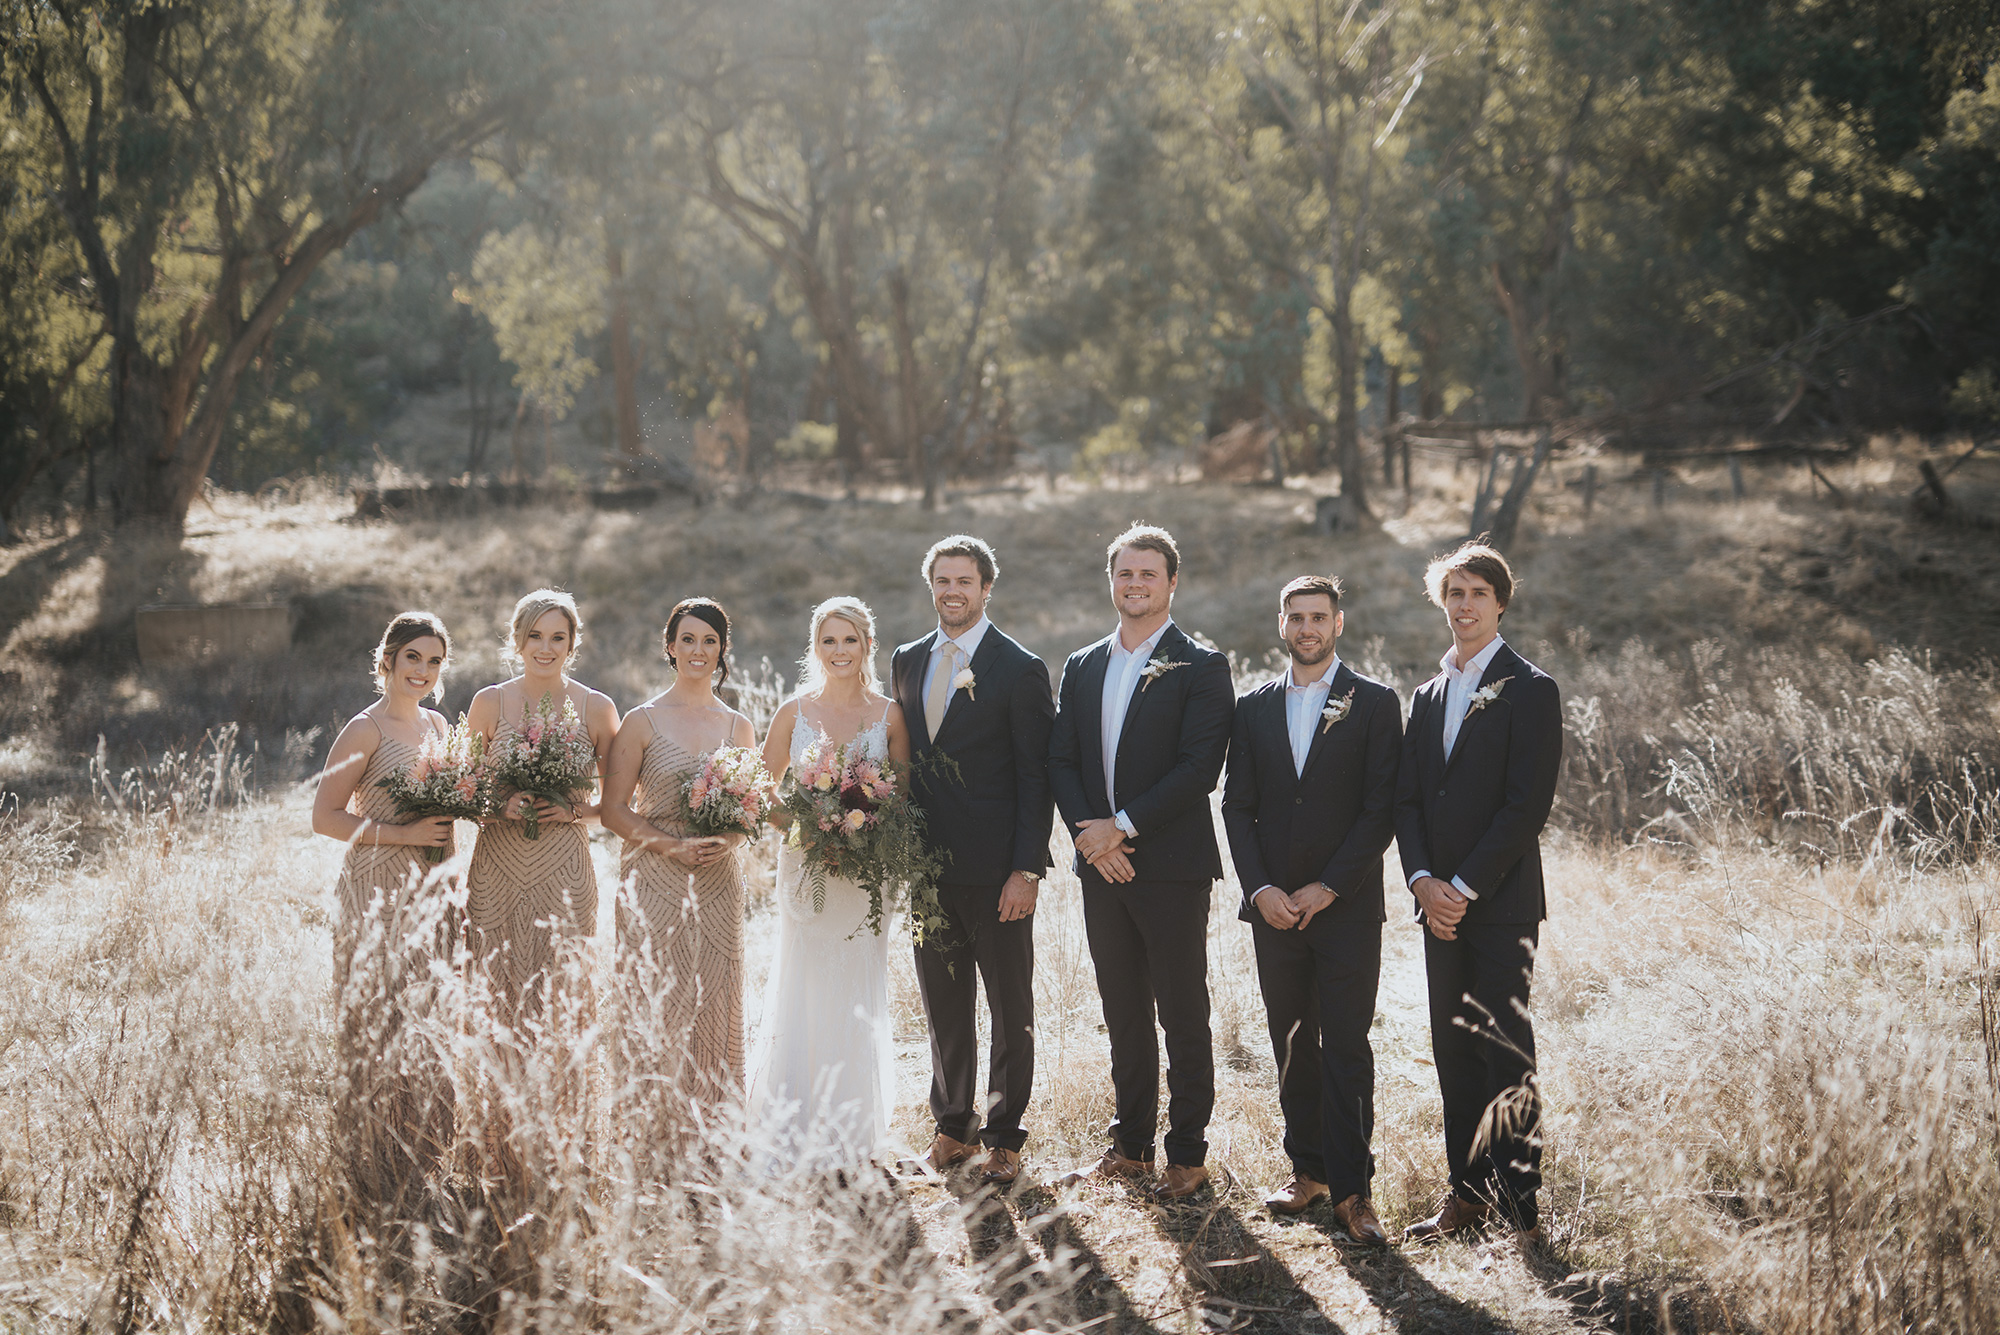 Kate_Tristan_Country-Rustic-Wedding_032